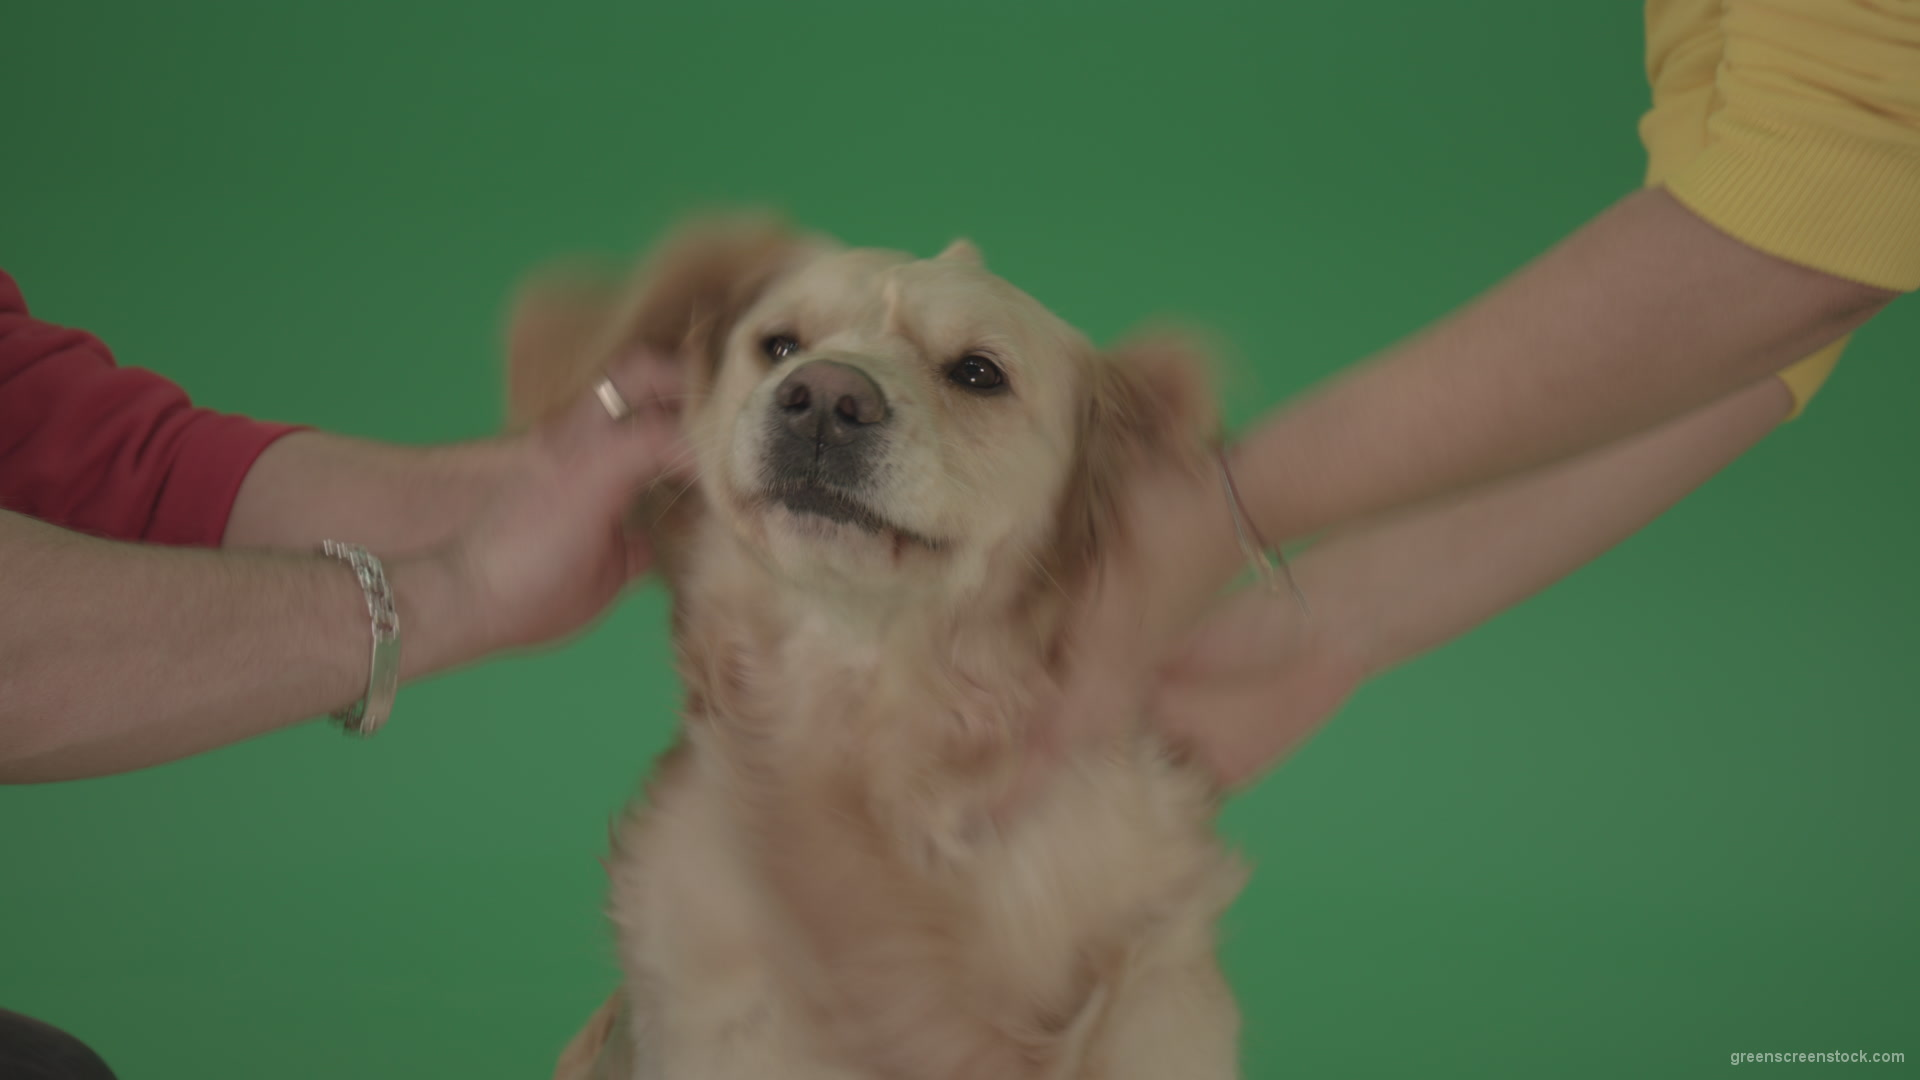 Funny-Golden-Retriever-owners-stroke-from-two-hands-hunter-Dog-isolated-on-green-screen-4K-video-footage_001 Green Screen Stock